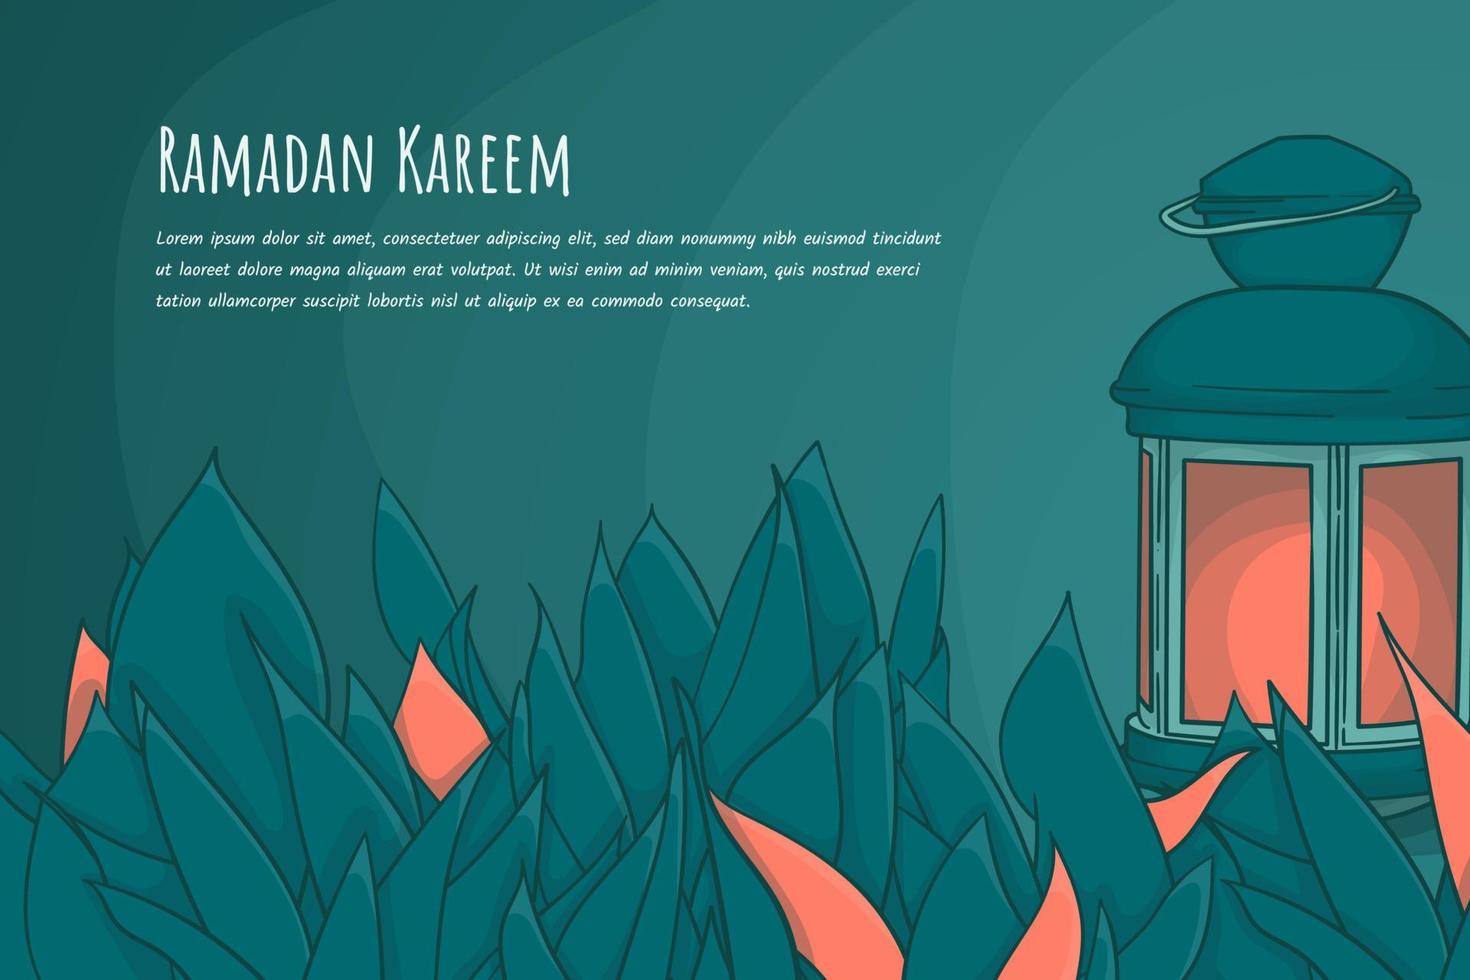 Lantern in green background with leaves in hand drawn design for ramadan kareem template vector